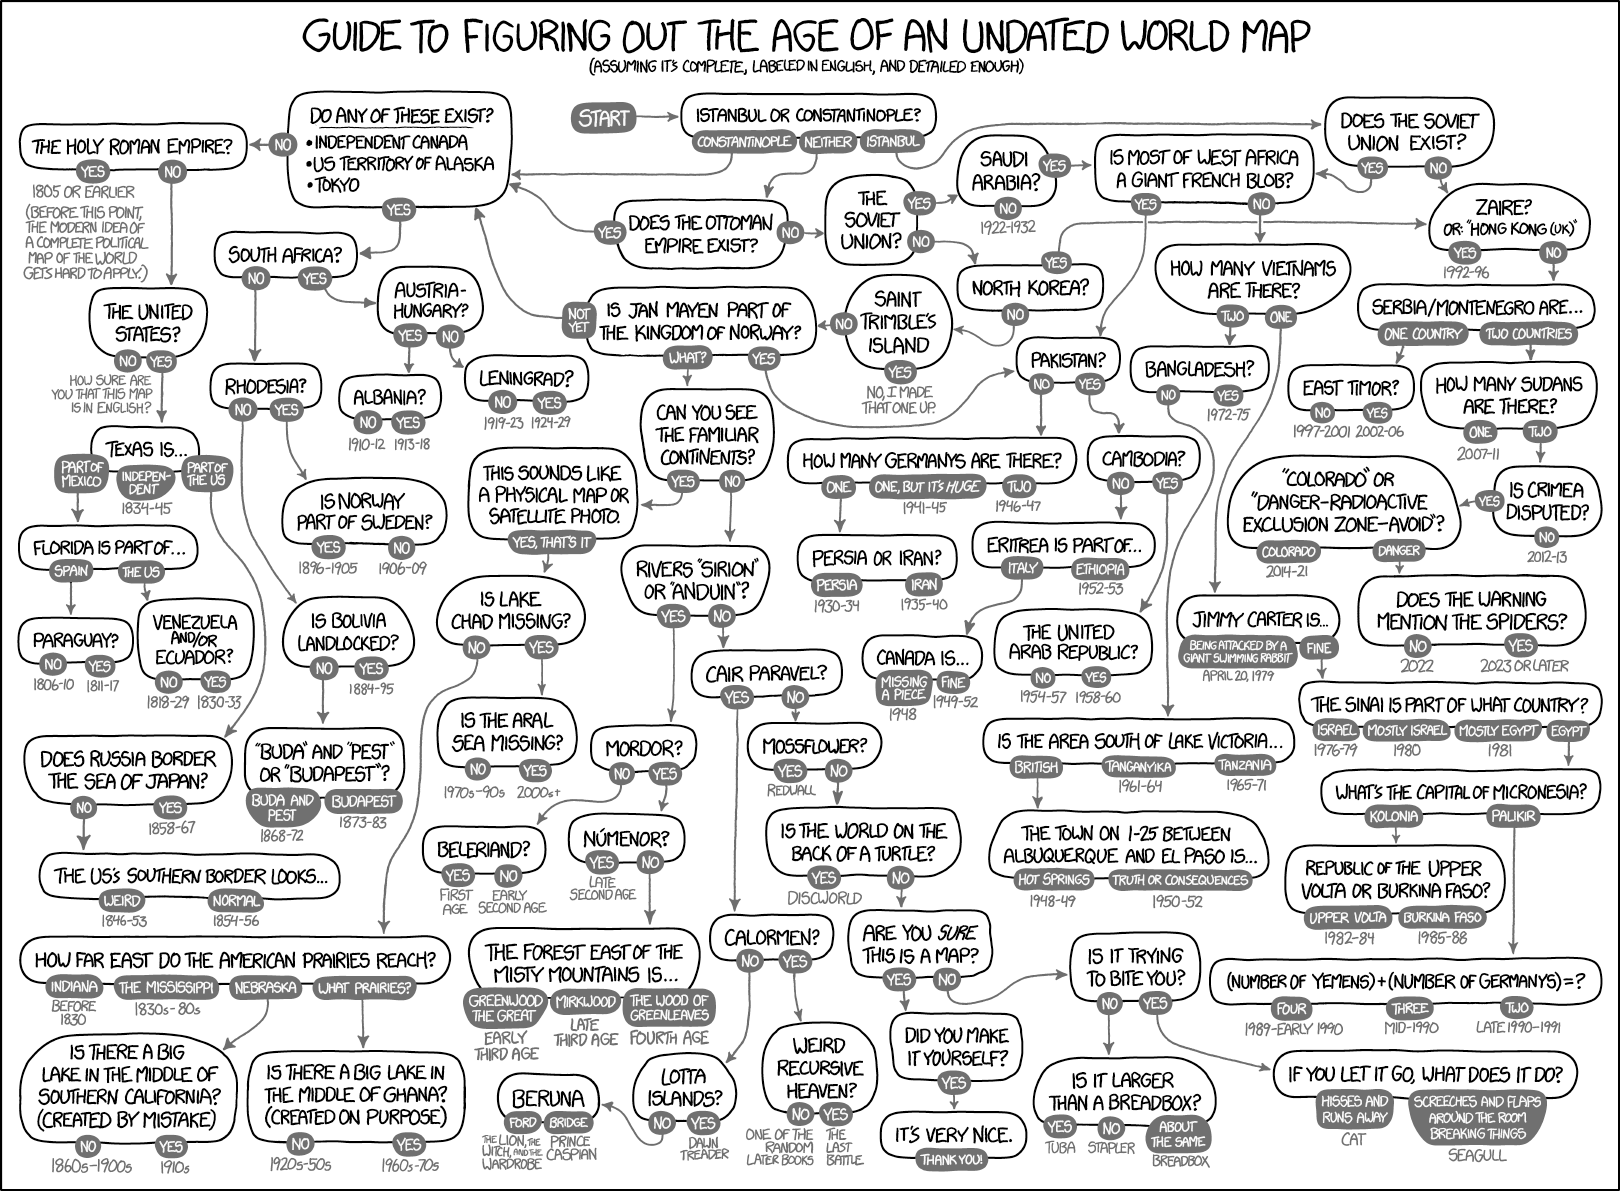 A Handy Flowchart That Helps Determine the Age of an Undated ...